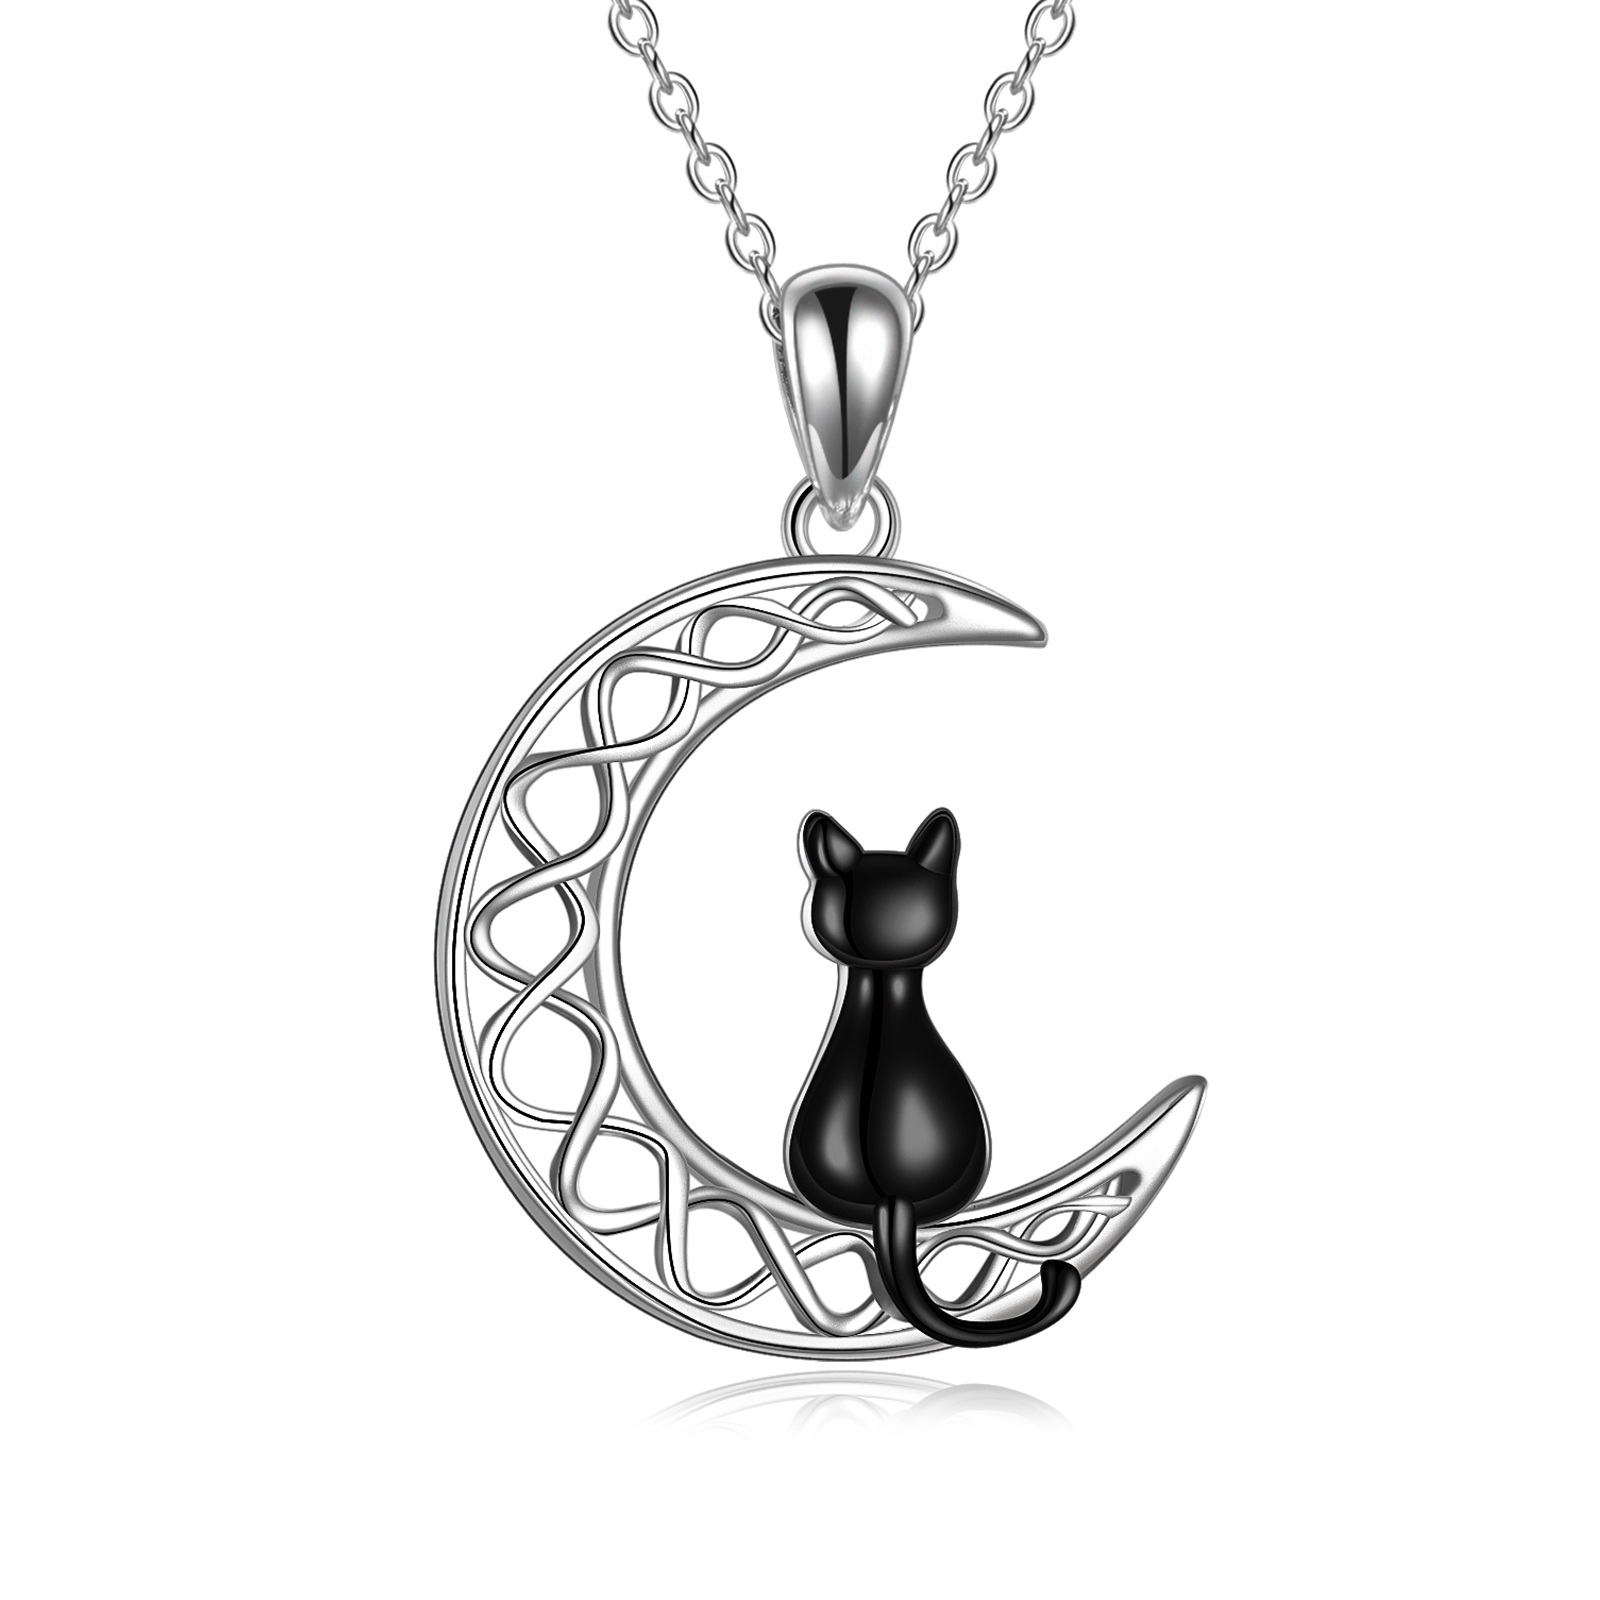 162693483240485b4fb - Celtic Moon Cat Necklace for Girls Sterling Silver Irish Jewelry